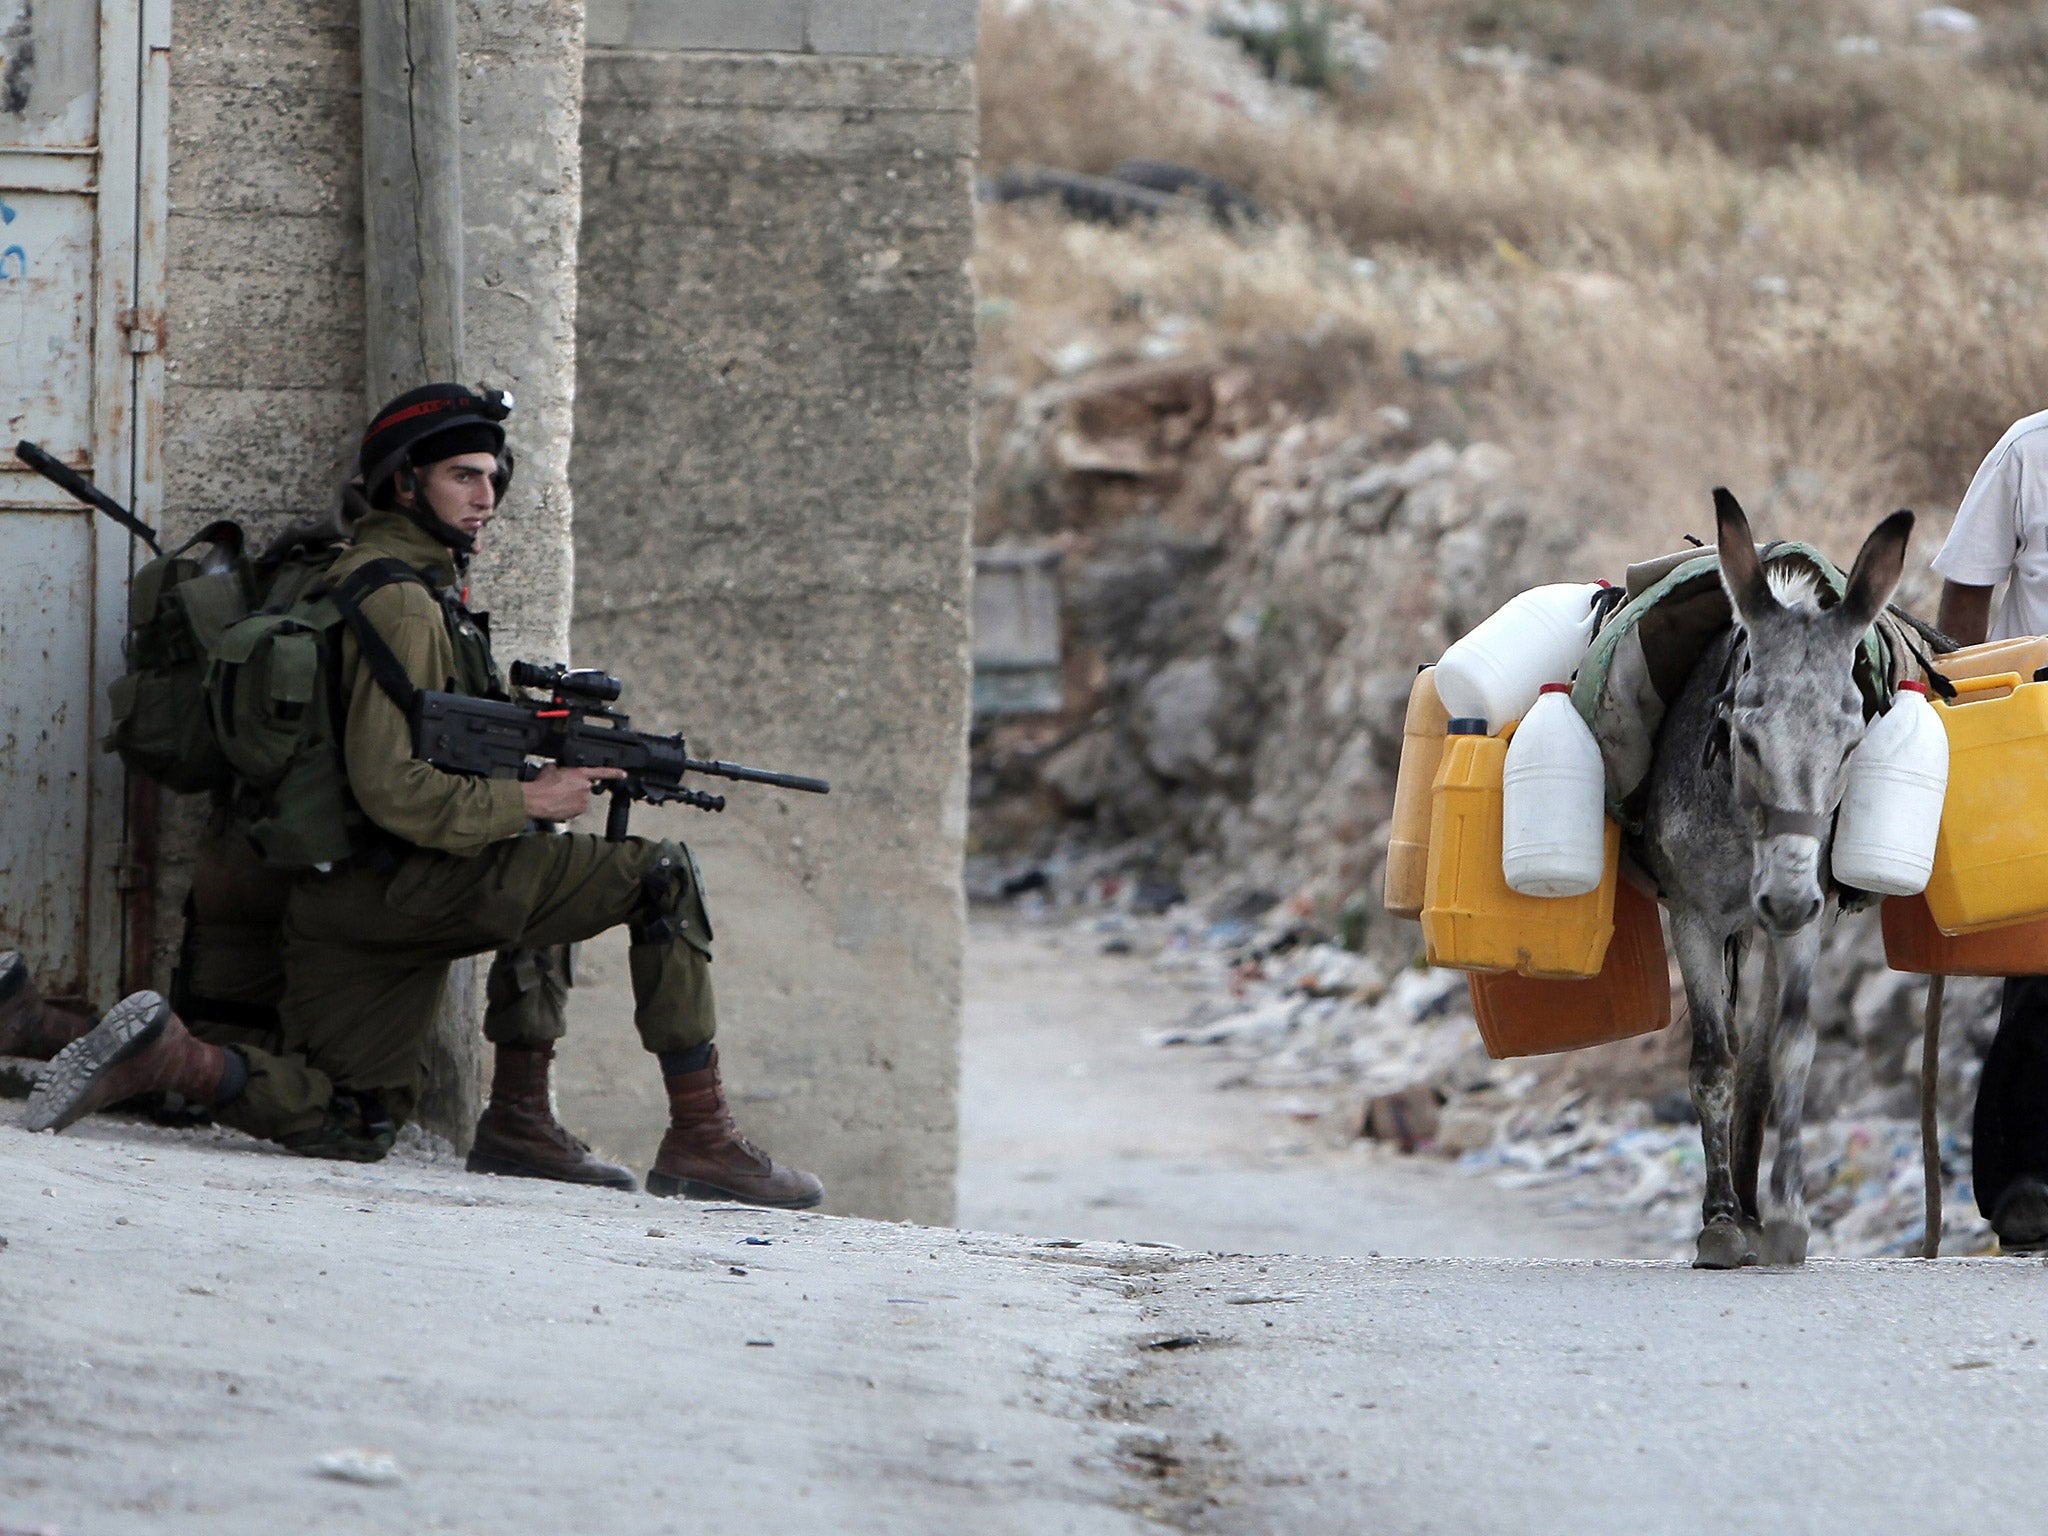 A donkey strapped with explosives was blown up after Israeli forces opened fire on the animal